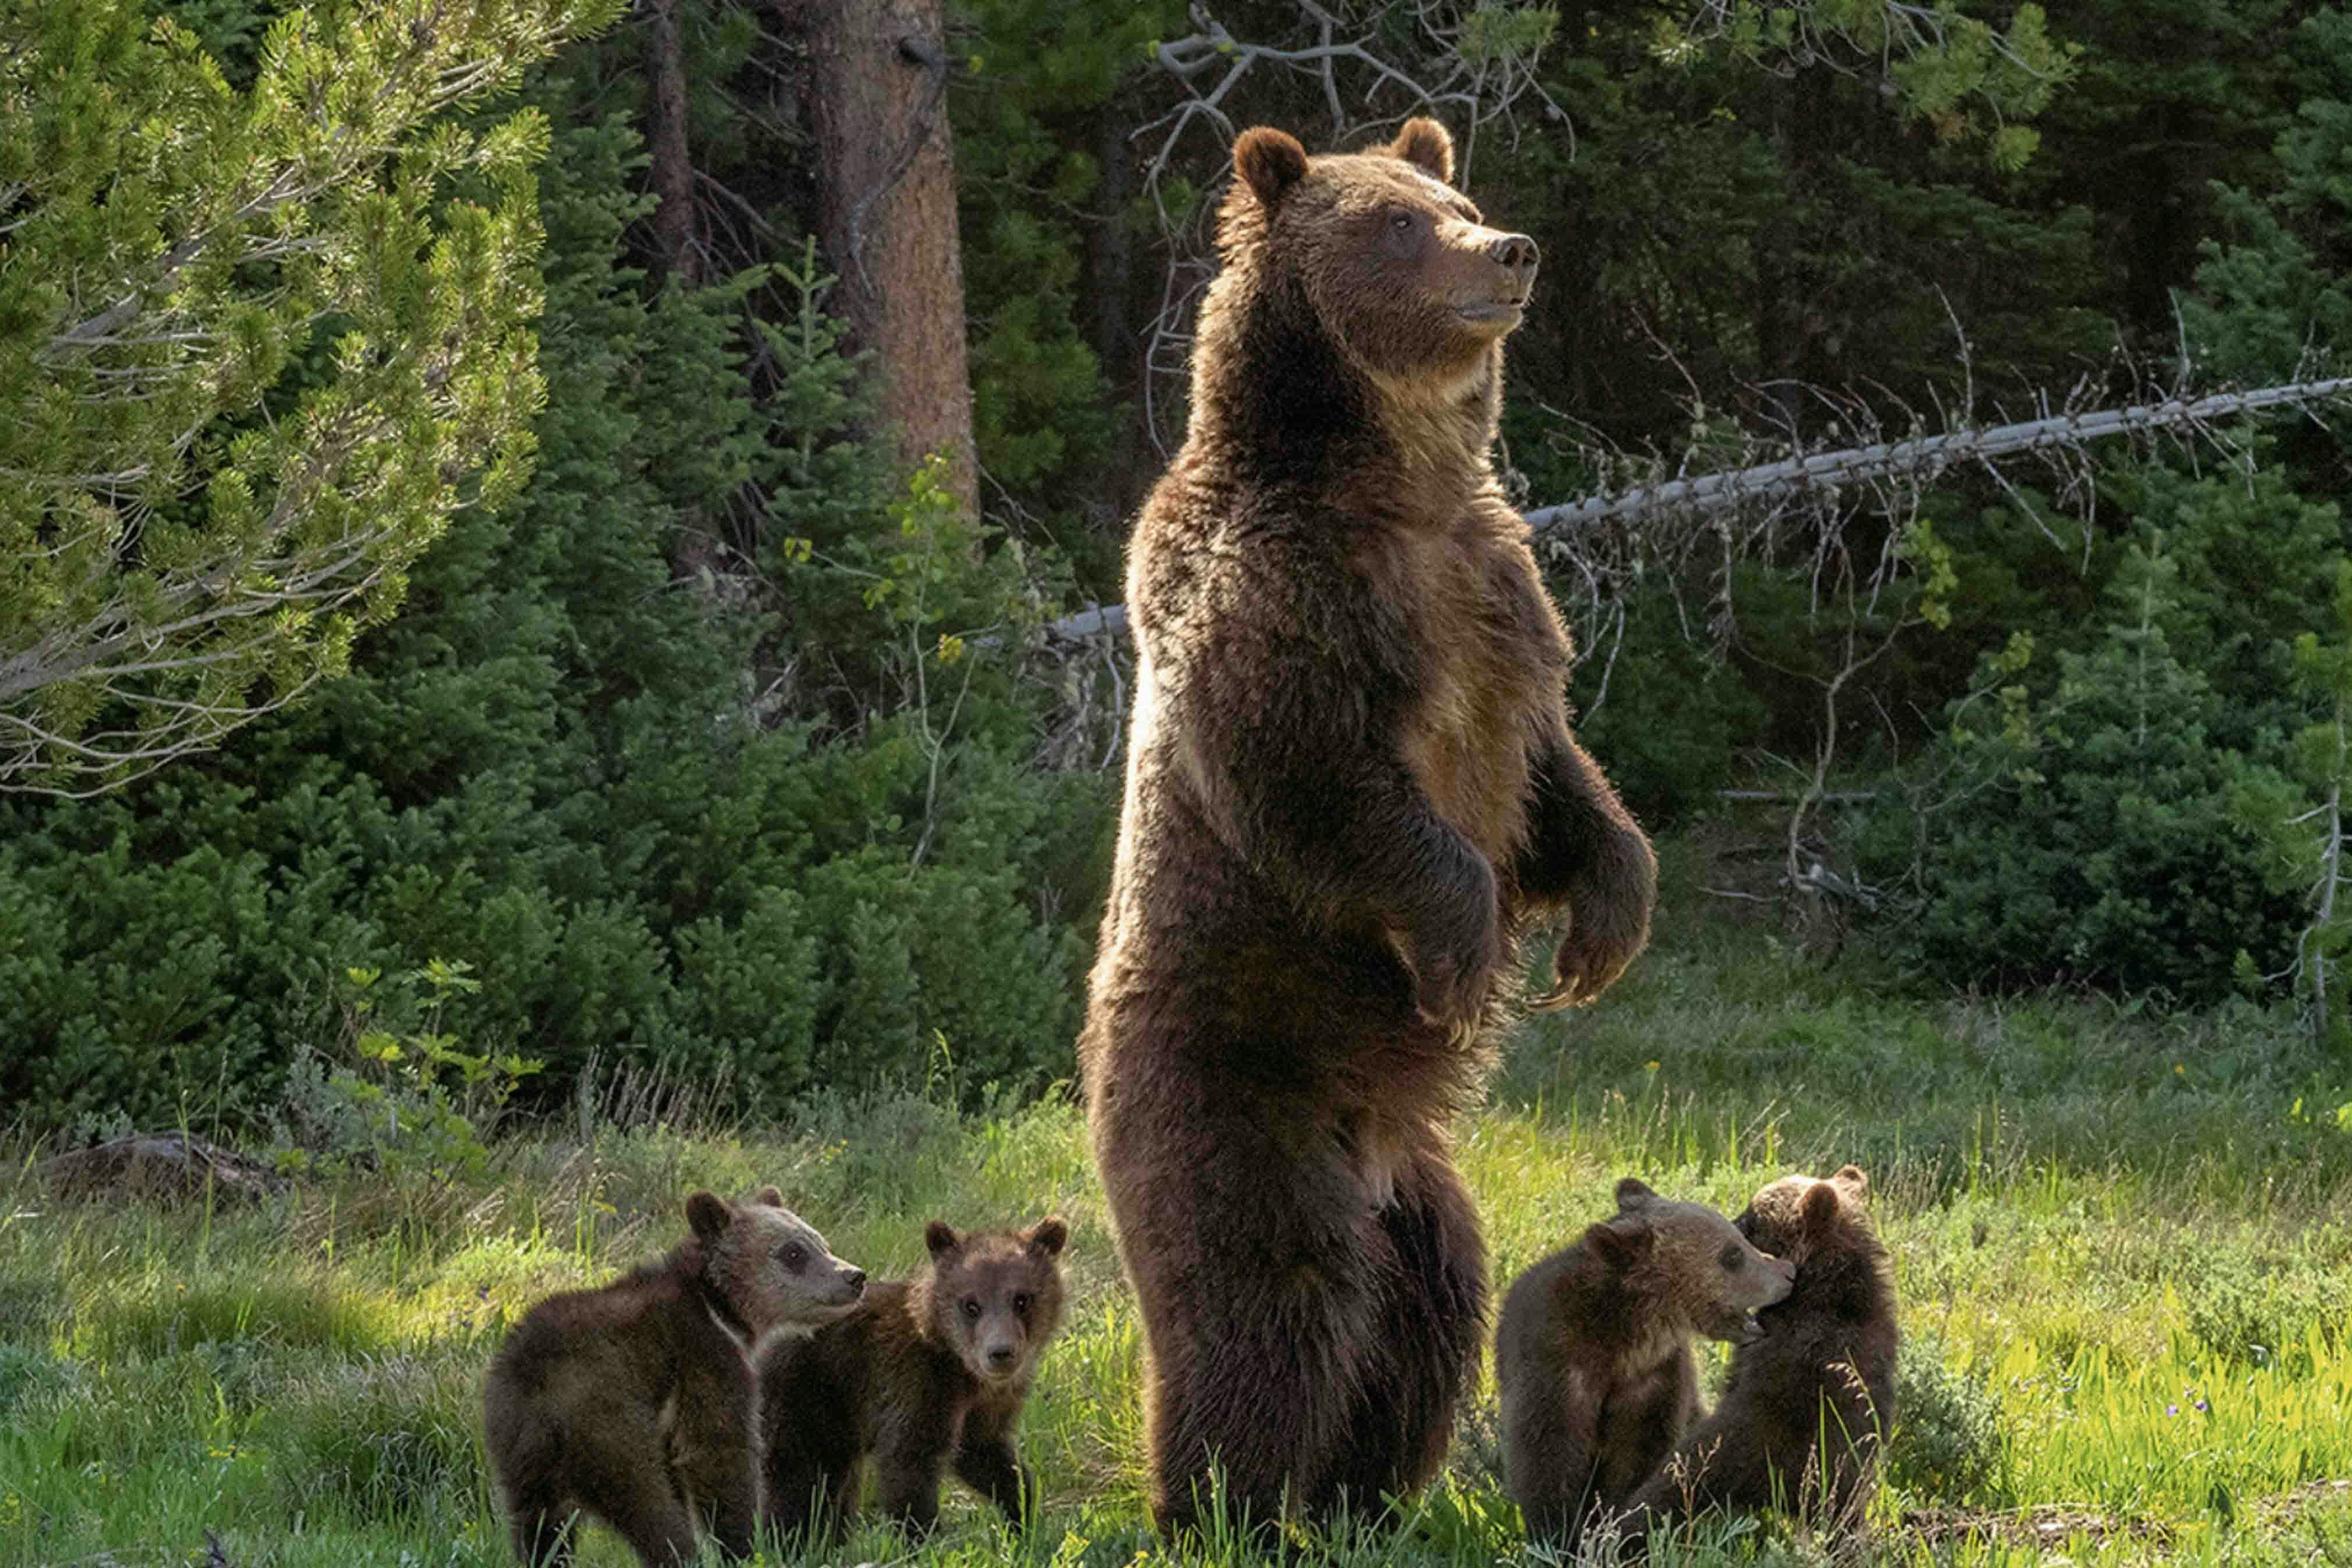 Grizzly 399 and her four cubs